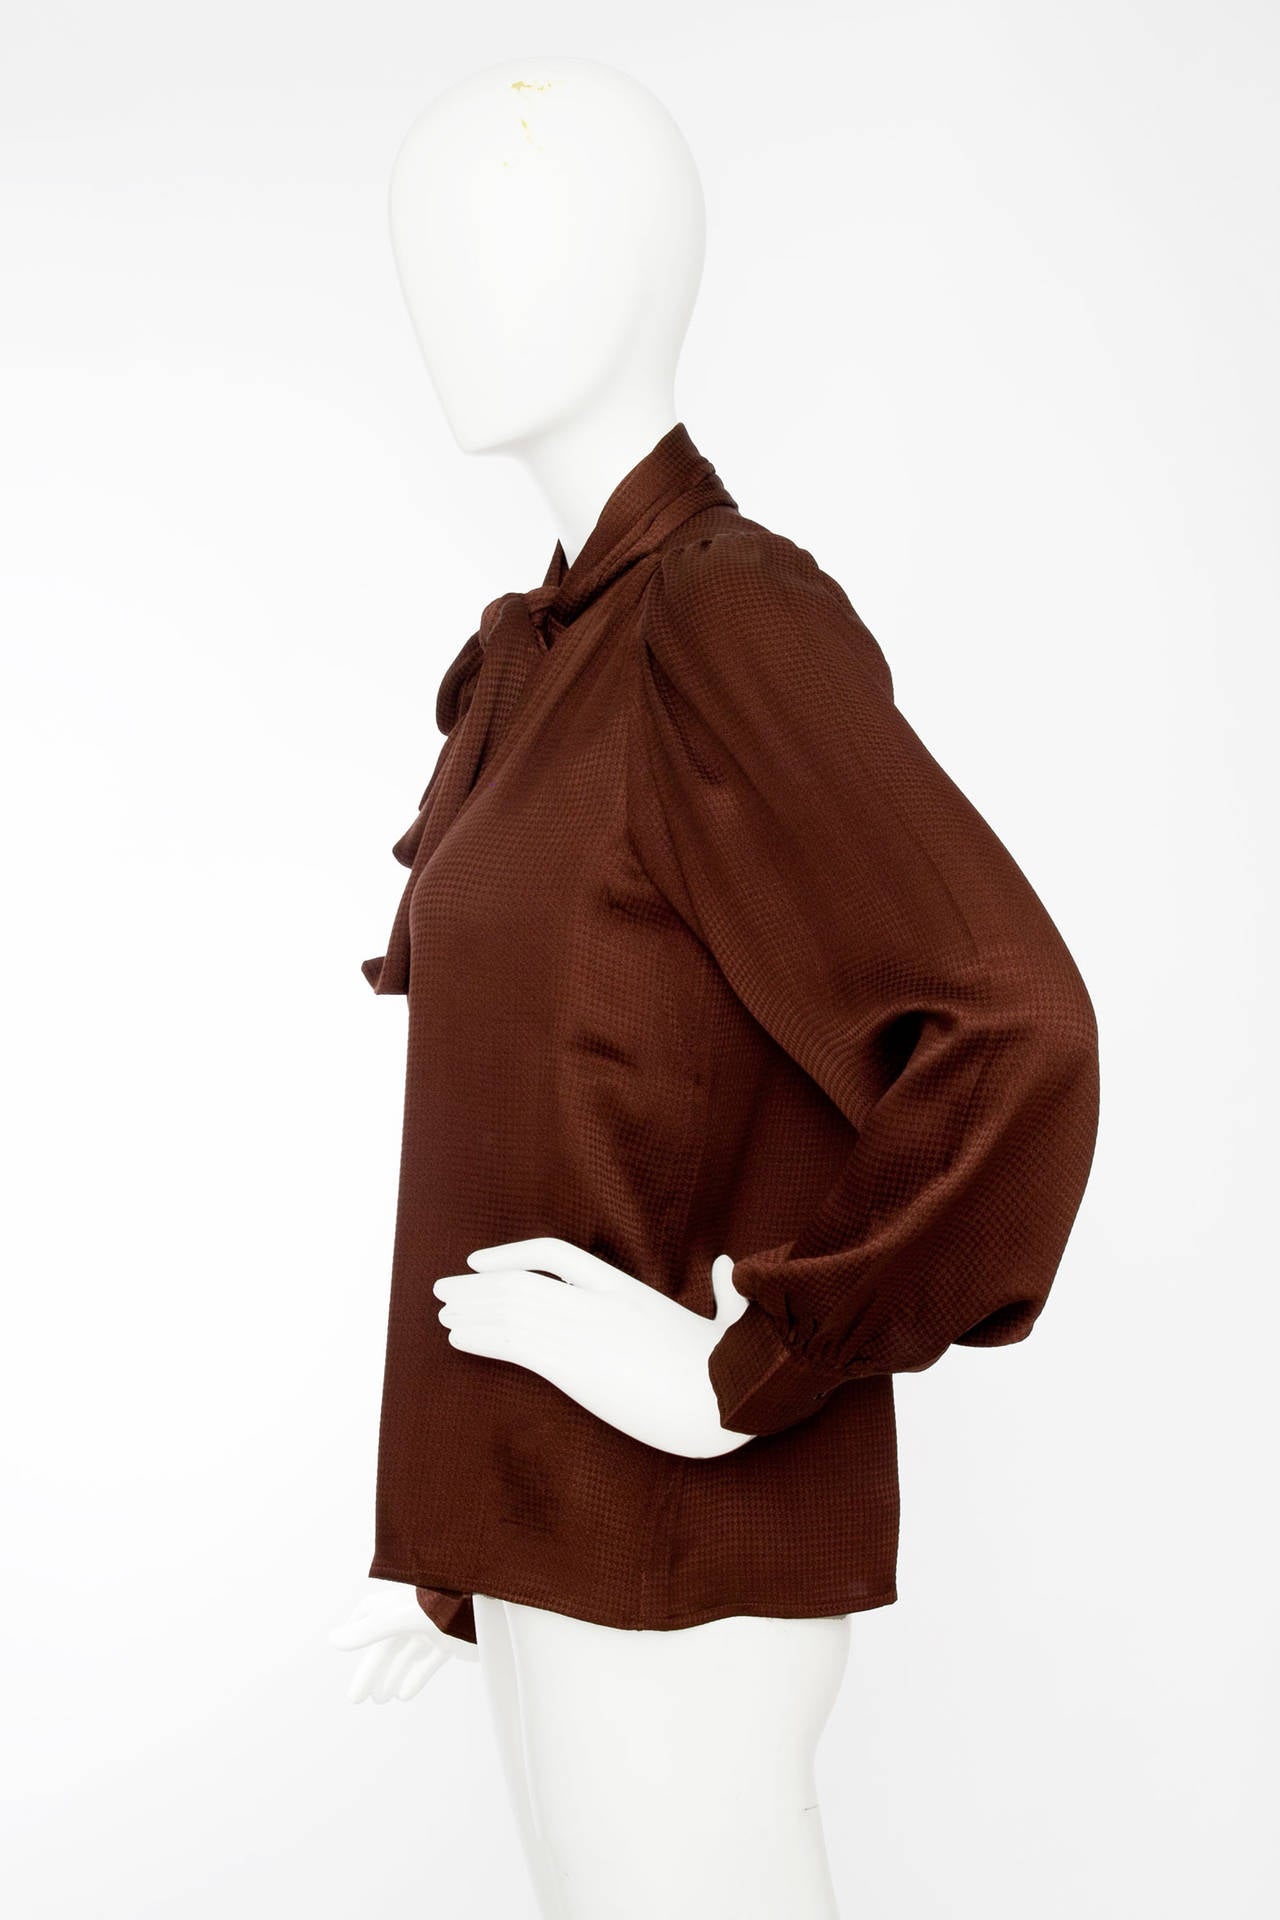 A 1980s Yves Saint Laurent chocolate brown silk blouse with a subtle houndstooth jacquard weaving and an attached scarf around the neckline. The blouse has a split front with a single button closure and one buttoned cuffs. 

The size of the blouse